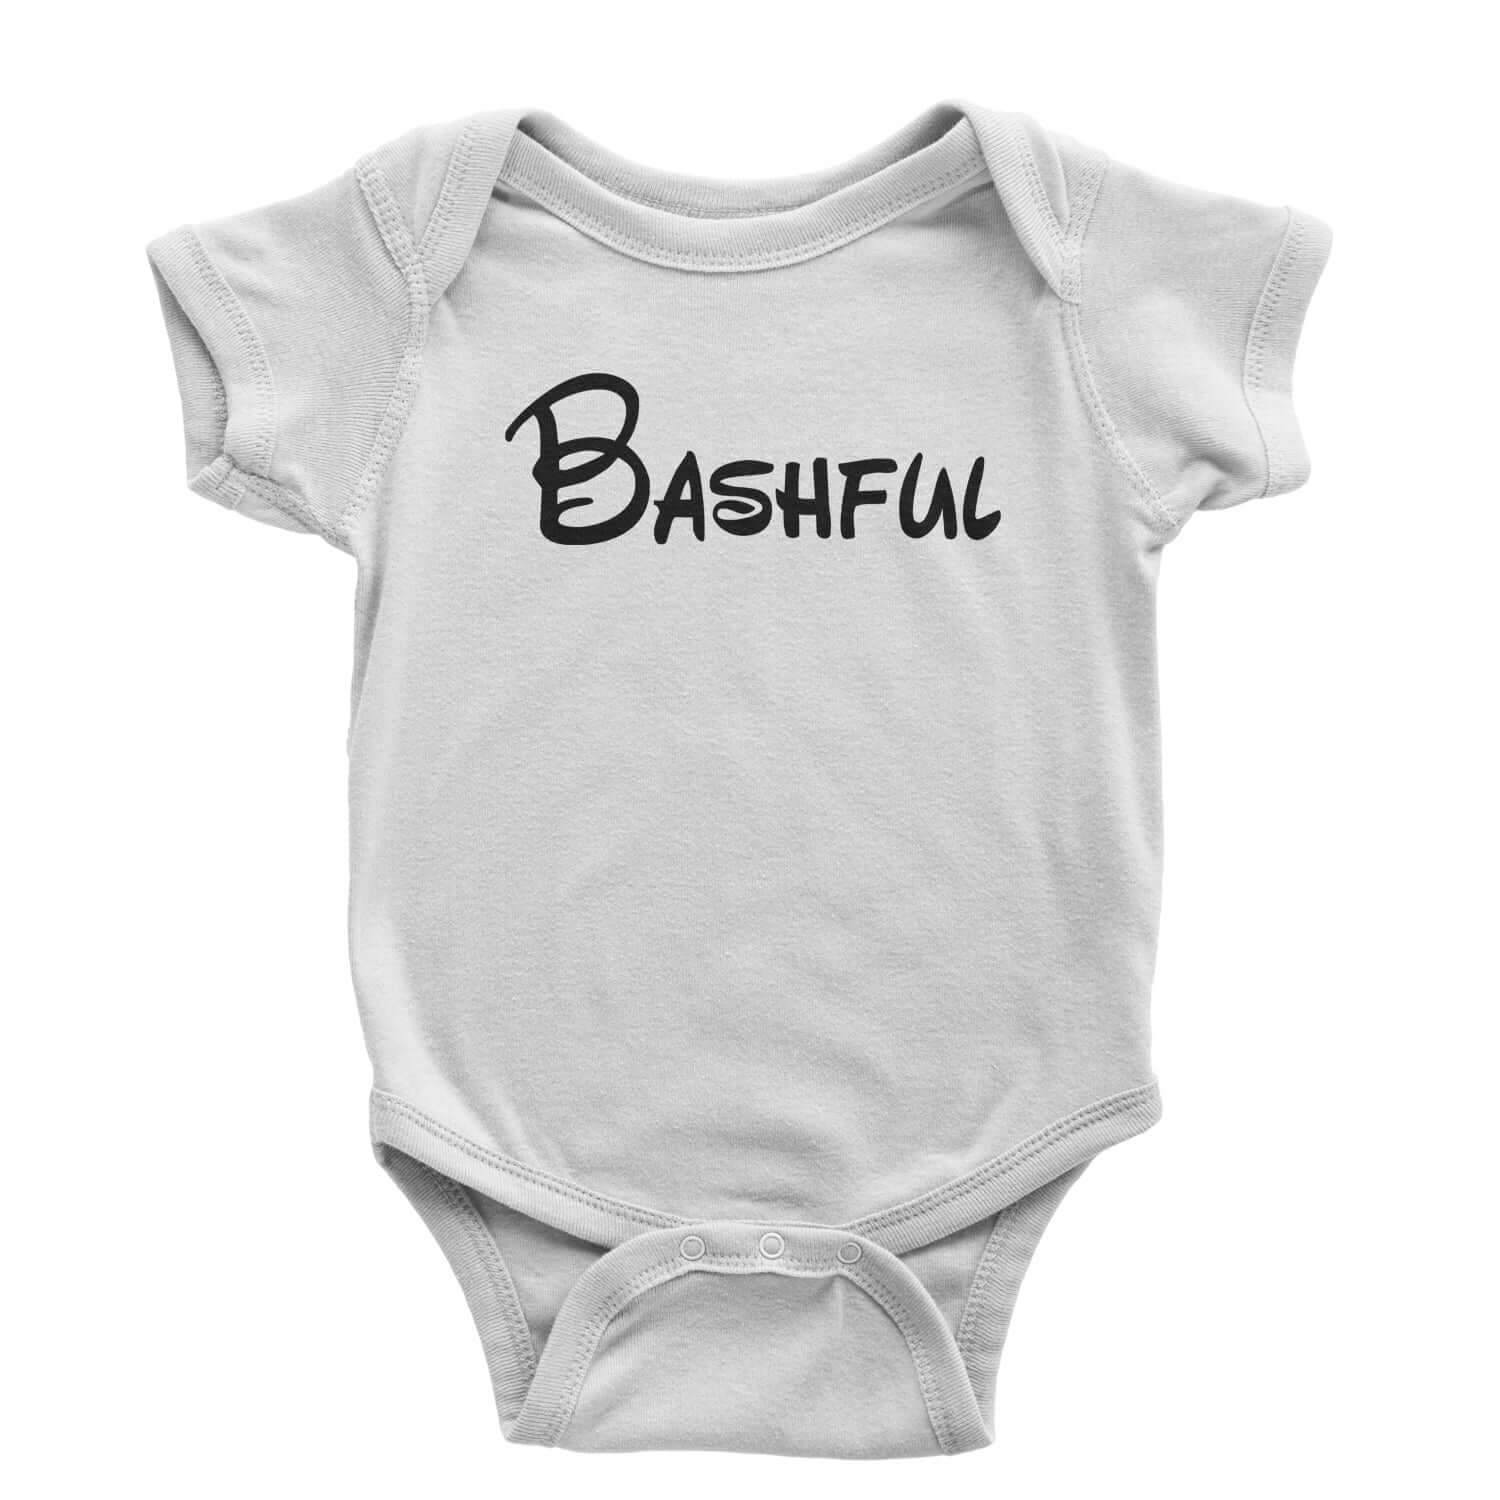 Bashful - 7 Dwarfs Costume Infant One-Piece Romper Bodysuit and, costume, dwarfs, group, halloween, matching, seven, snow, the, white by Expression Tees